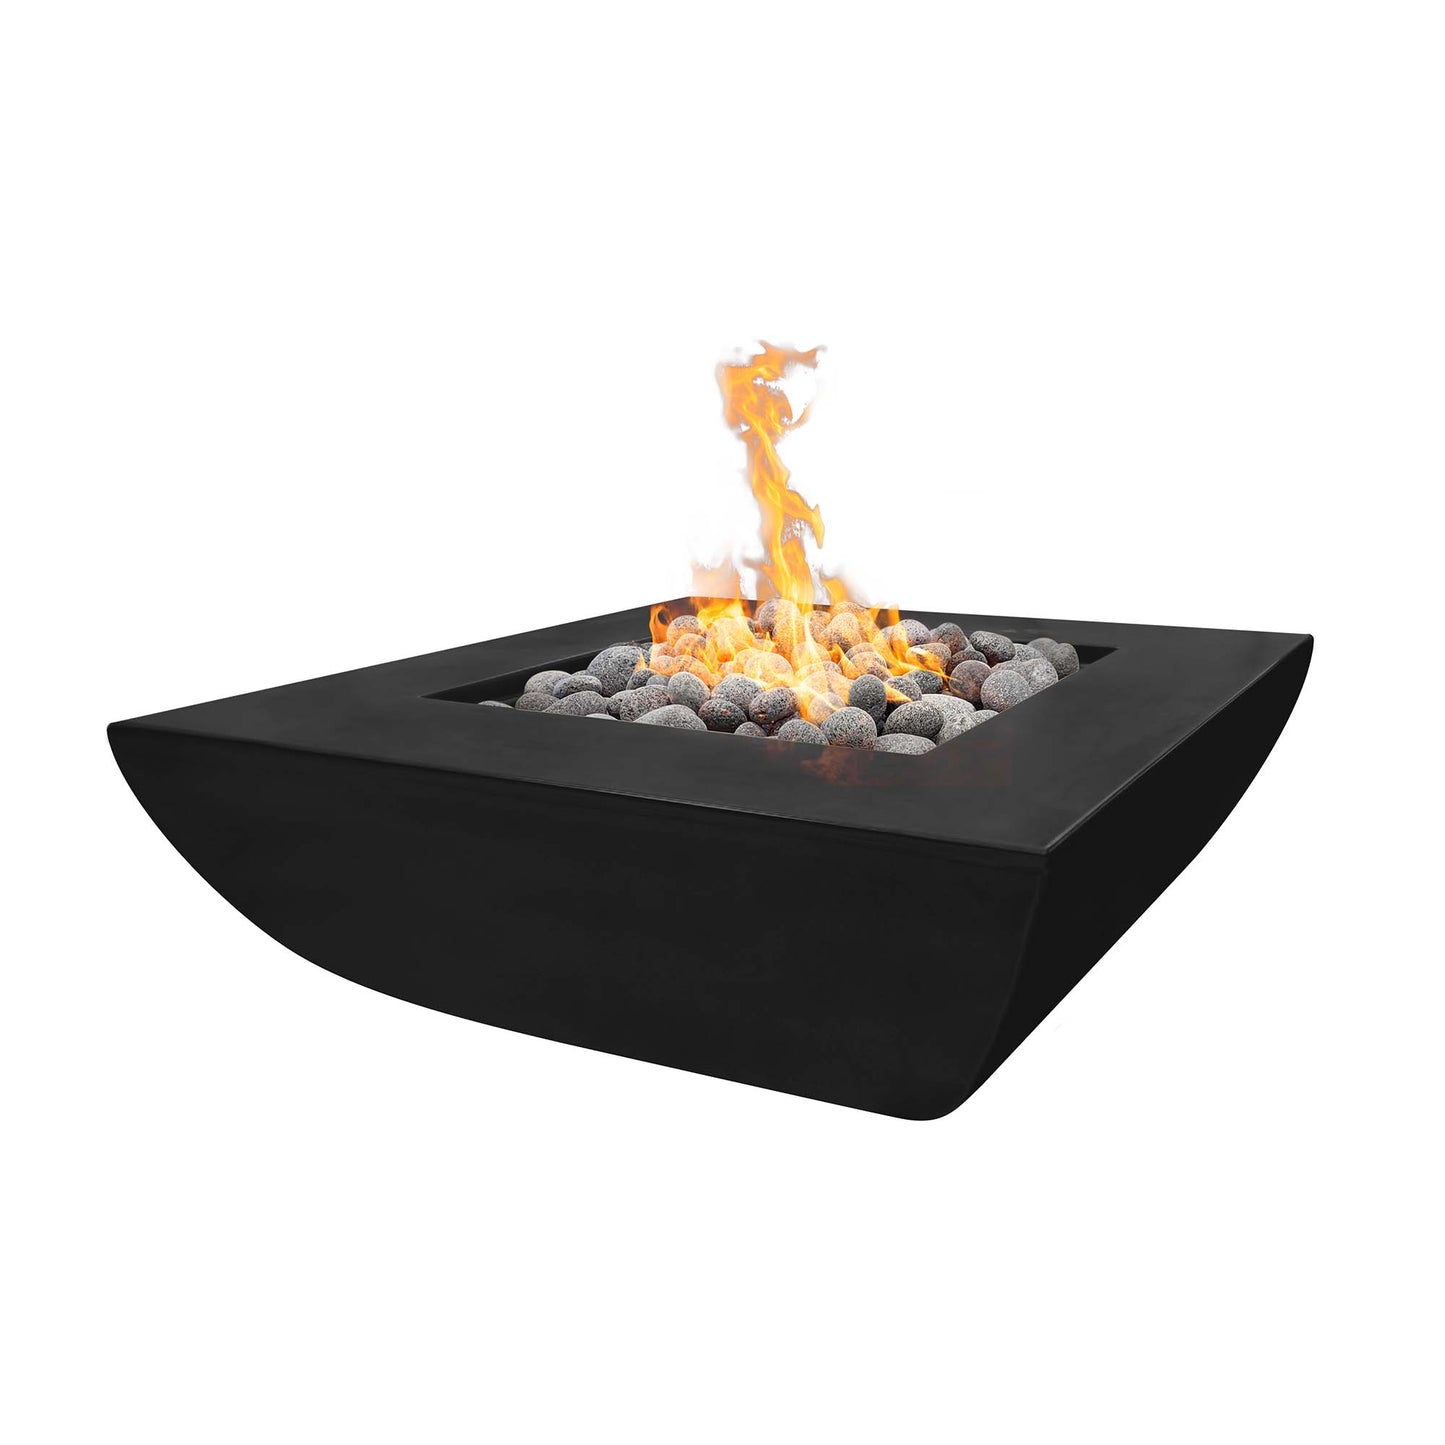 The Outdoor Plus Square Avalon 42" Metallic Silver GFRC Concrete Liquid Propane Fire Pit with 110V Electronic Ignition